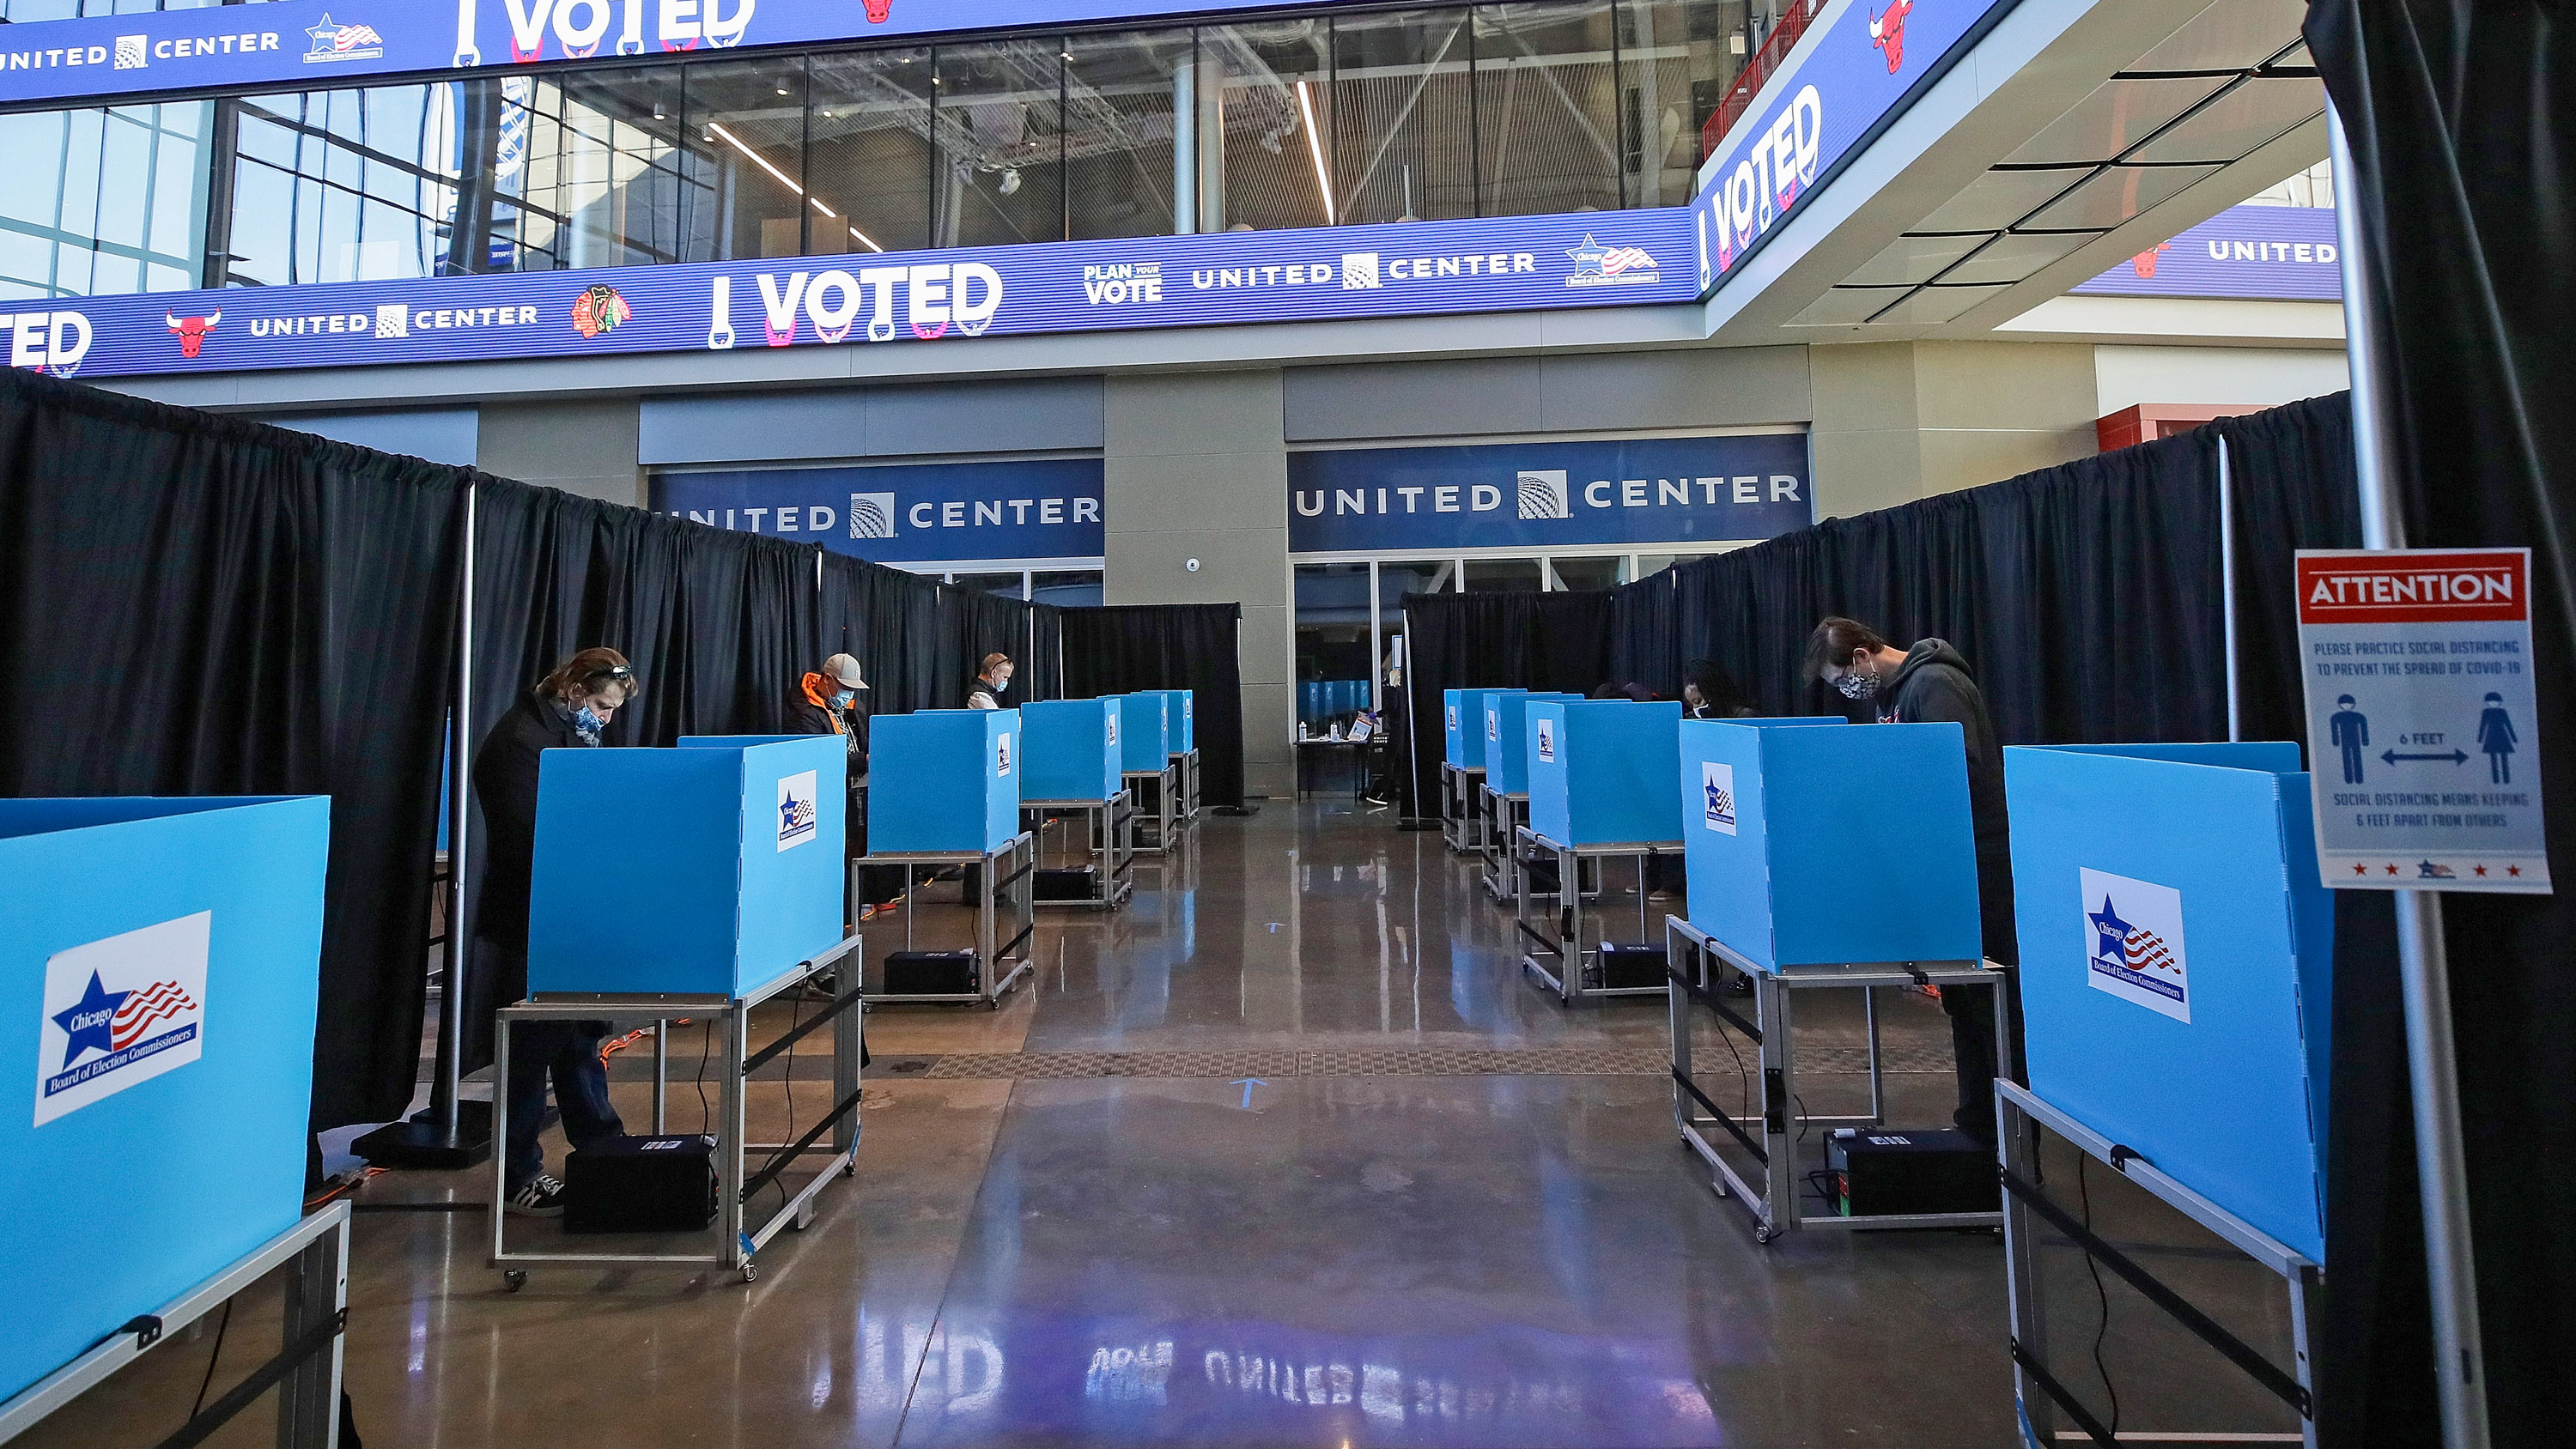 voters casting ballots at the United Center in Chicago in 2020